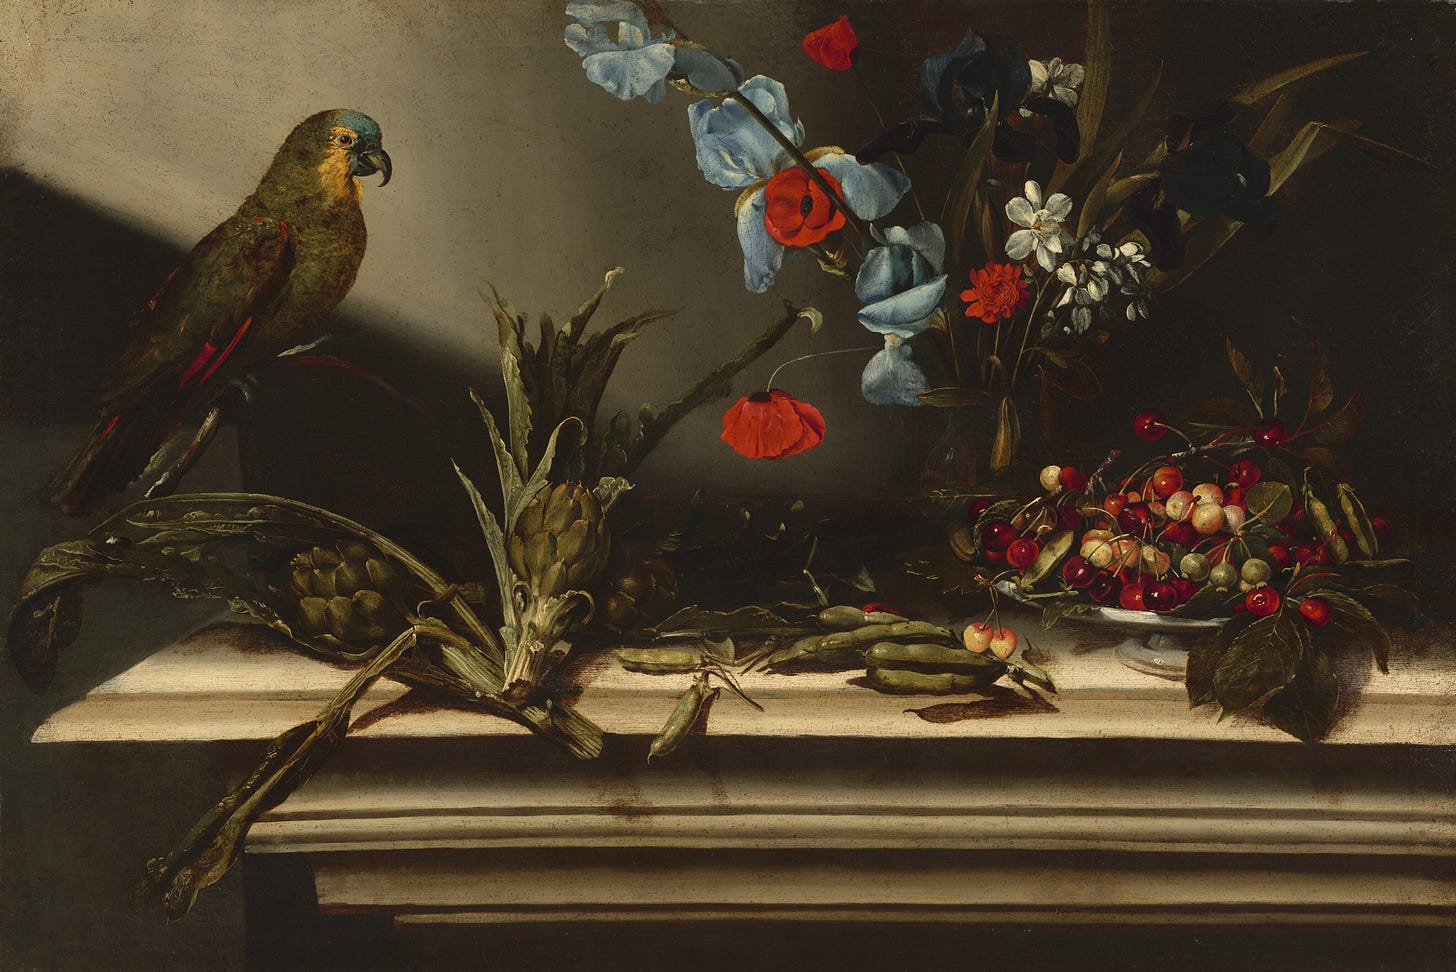 Still Life with Artichokes and a Parrot, 17th century by Italian 17th Century Painter